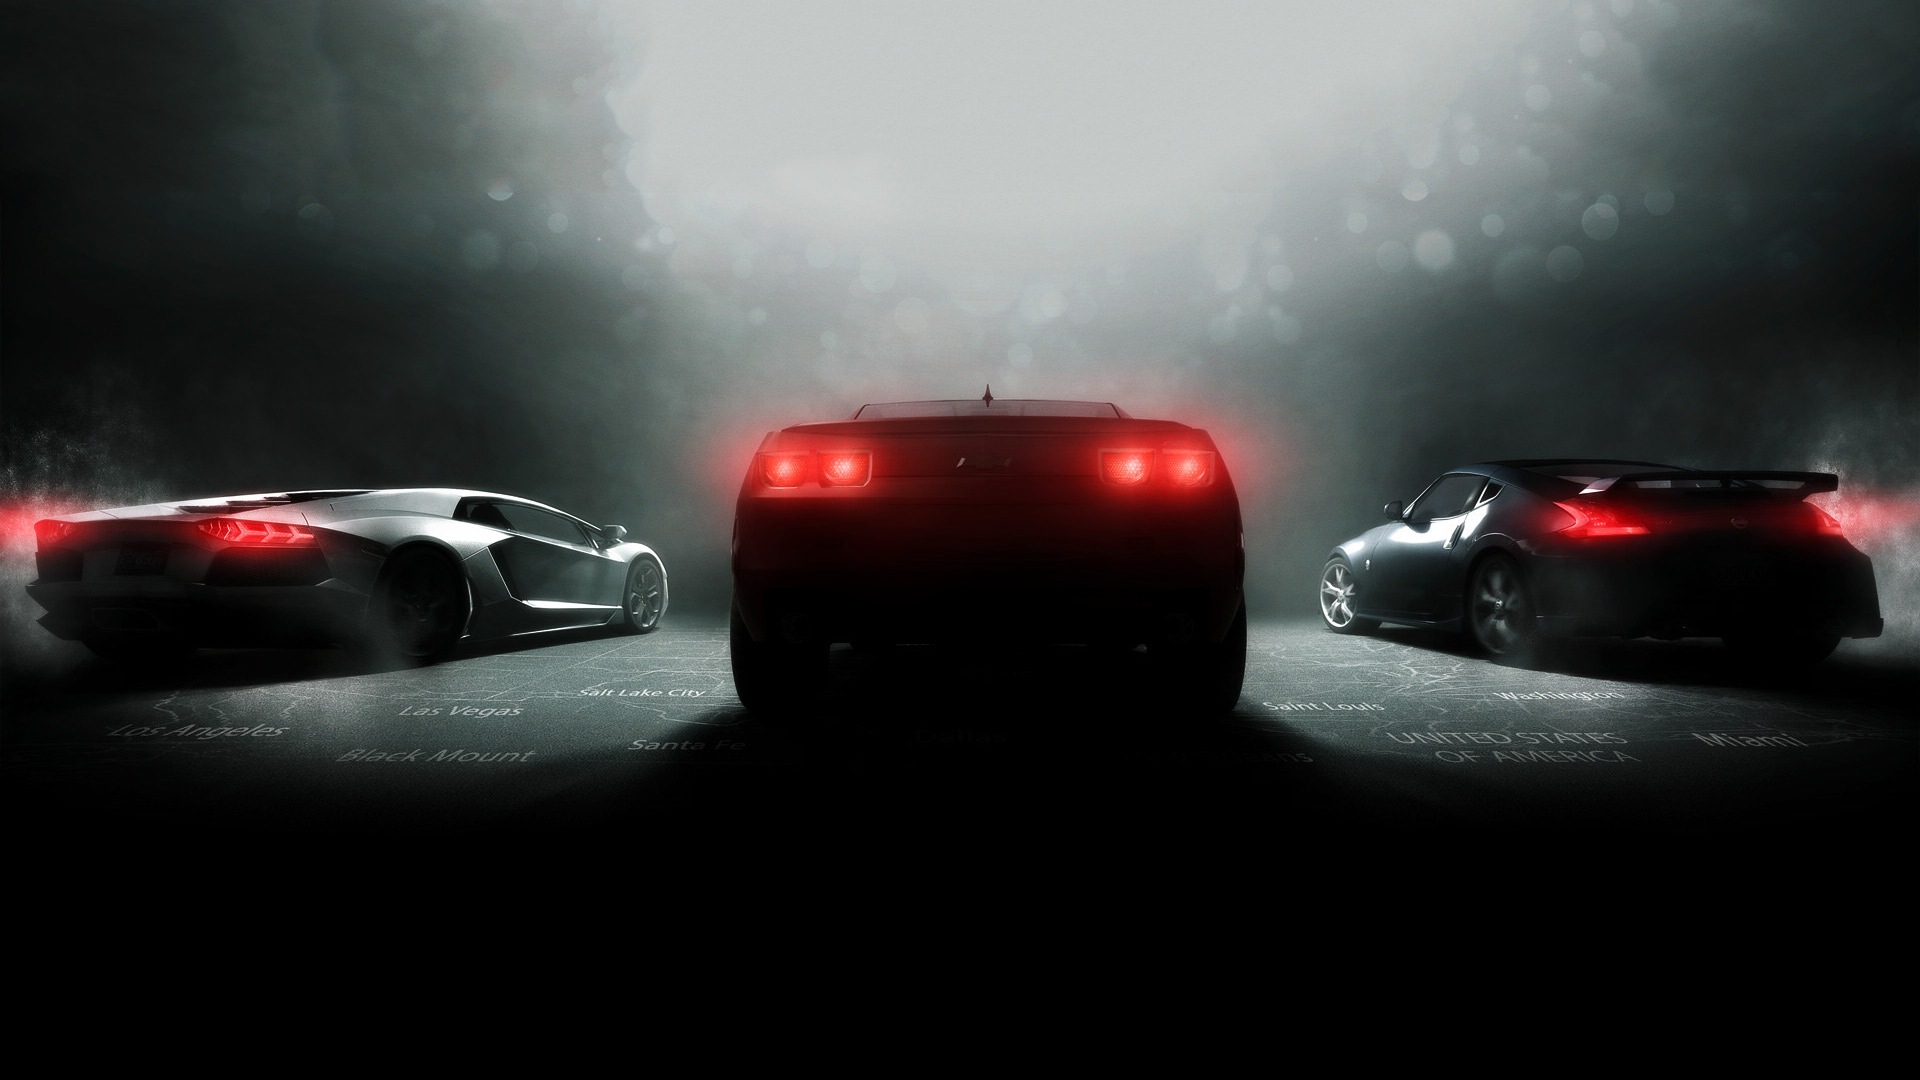 The Crew game HD wallpapers #3 - 1920x1080